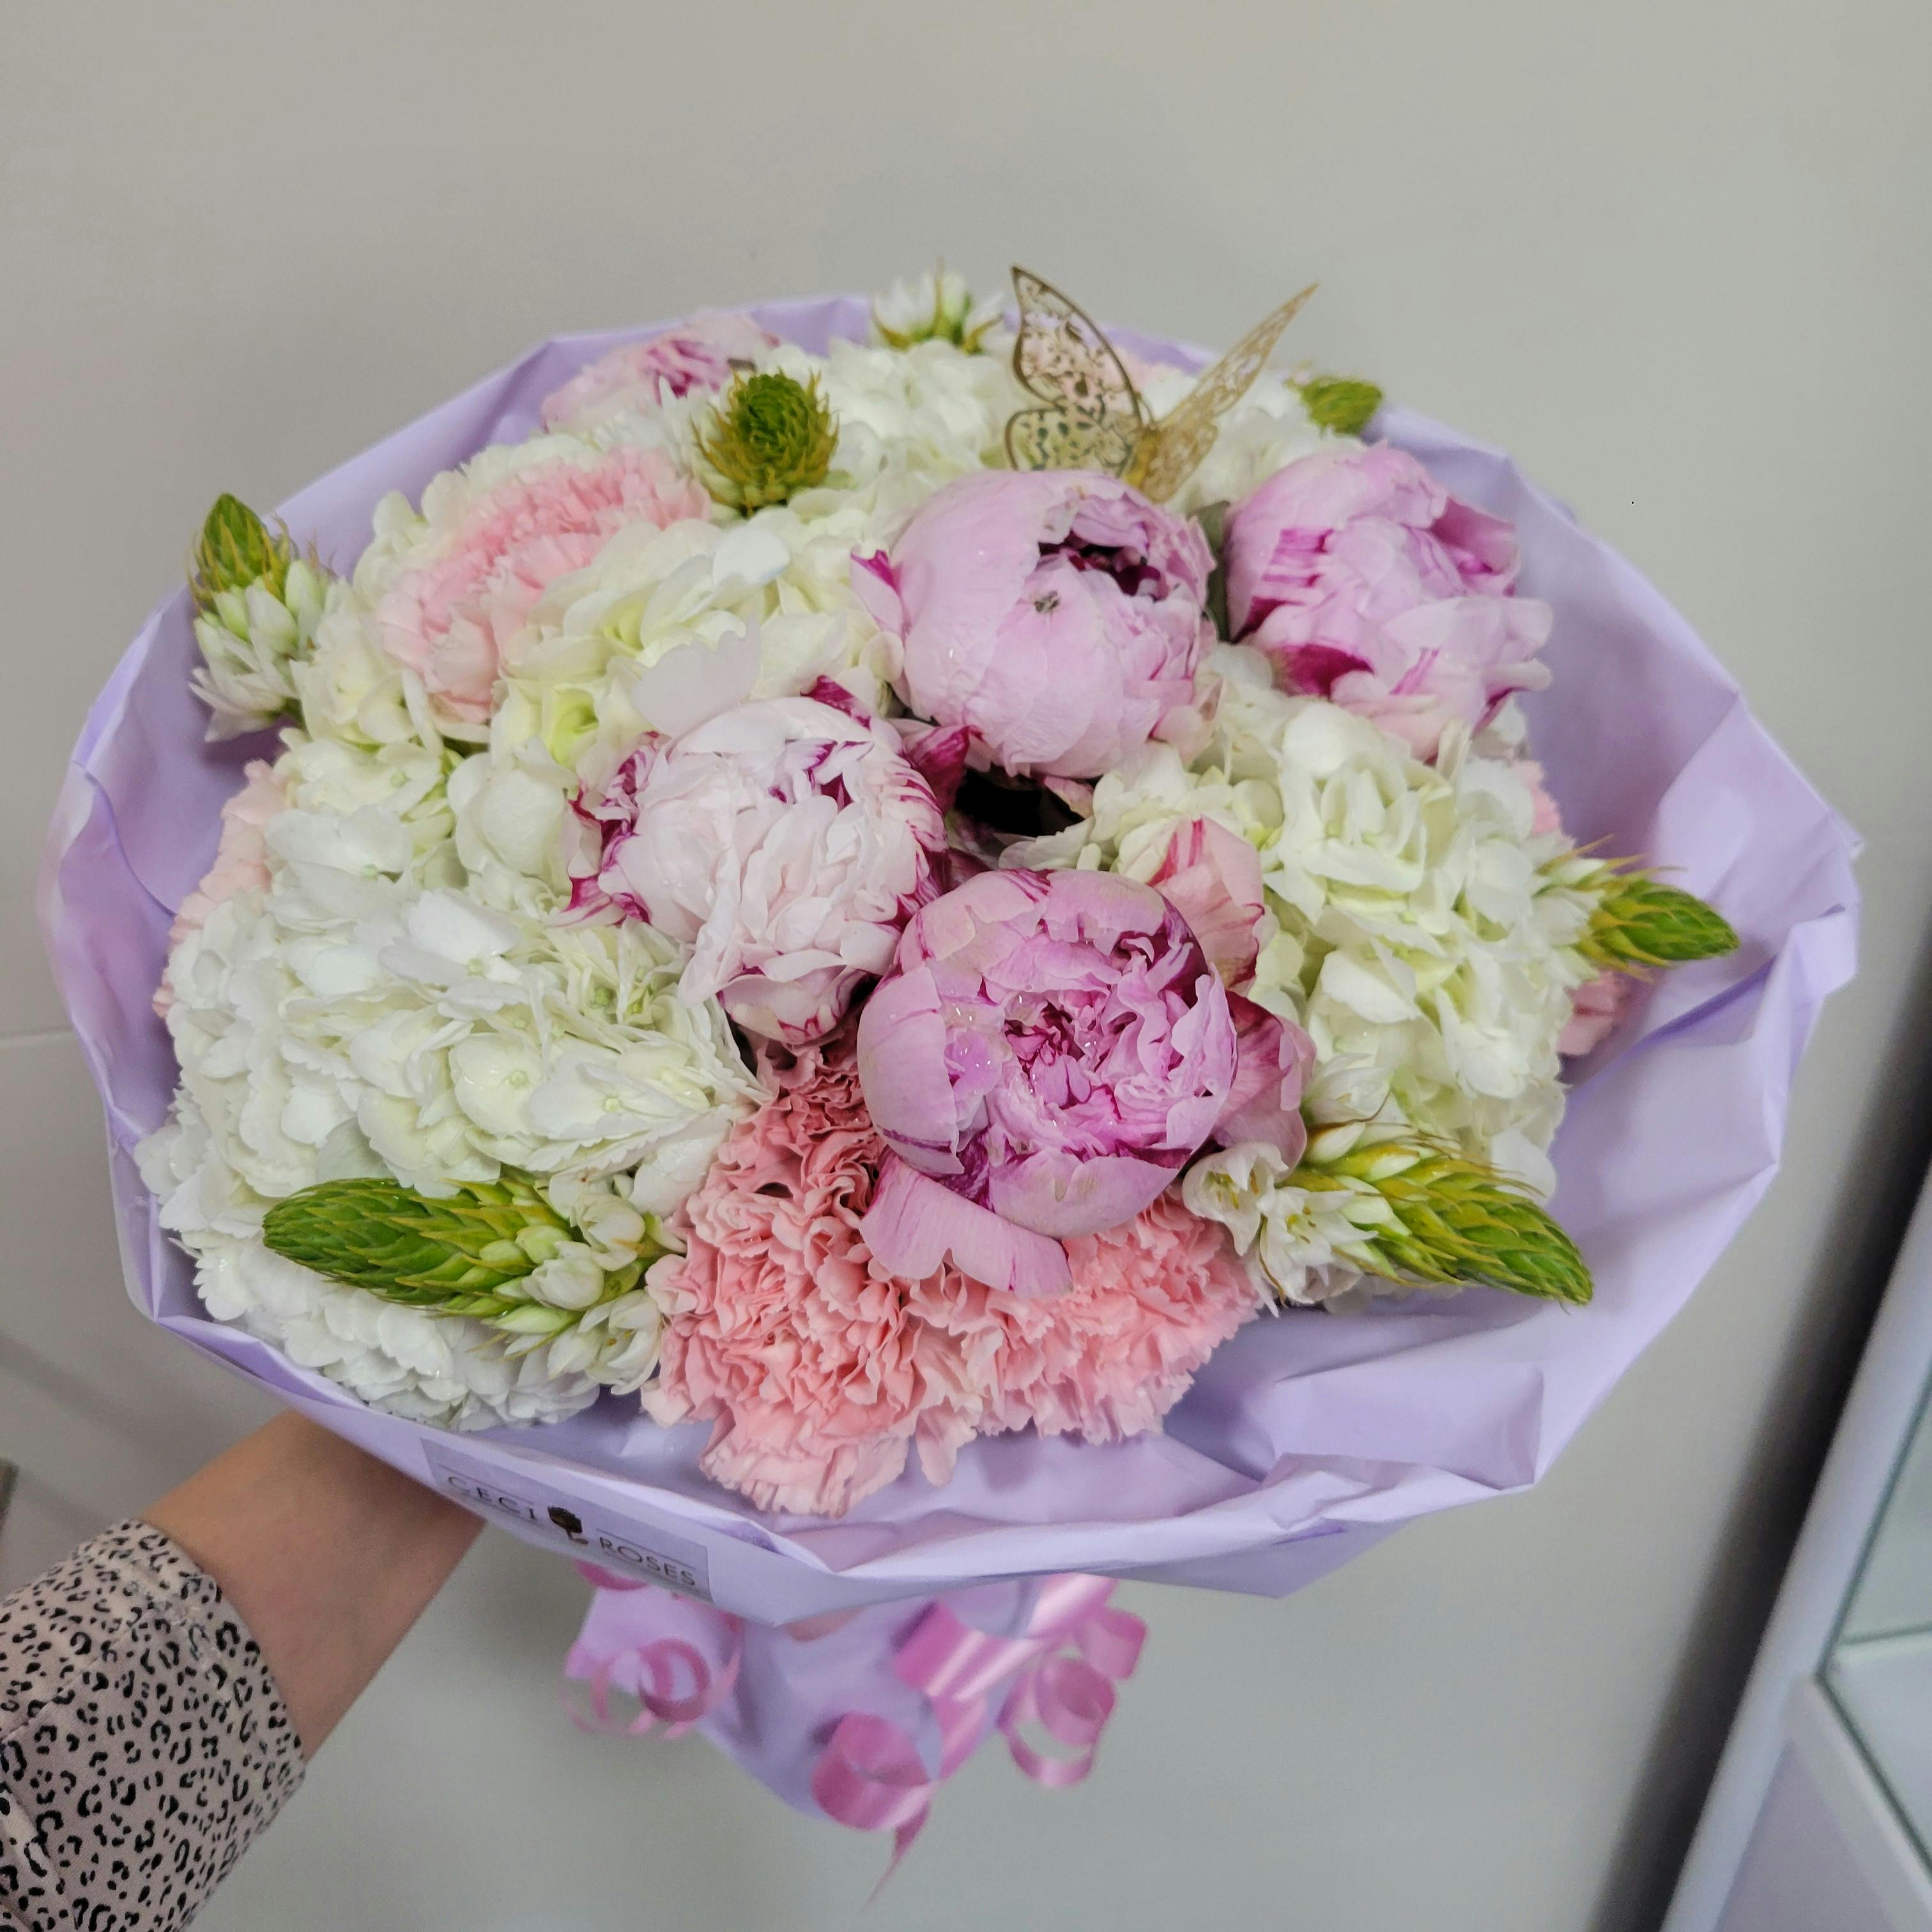 Fashion Bouquet with Peonies.